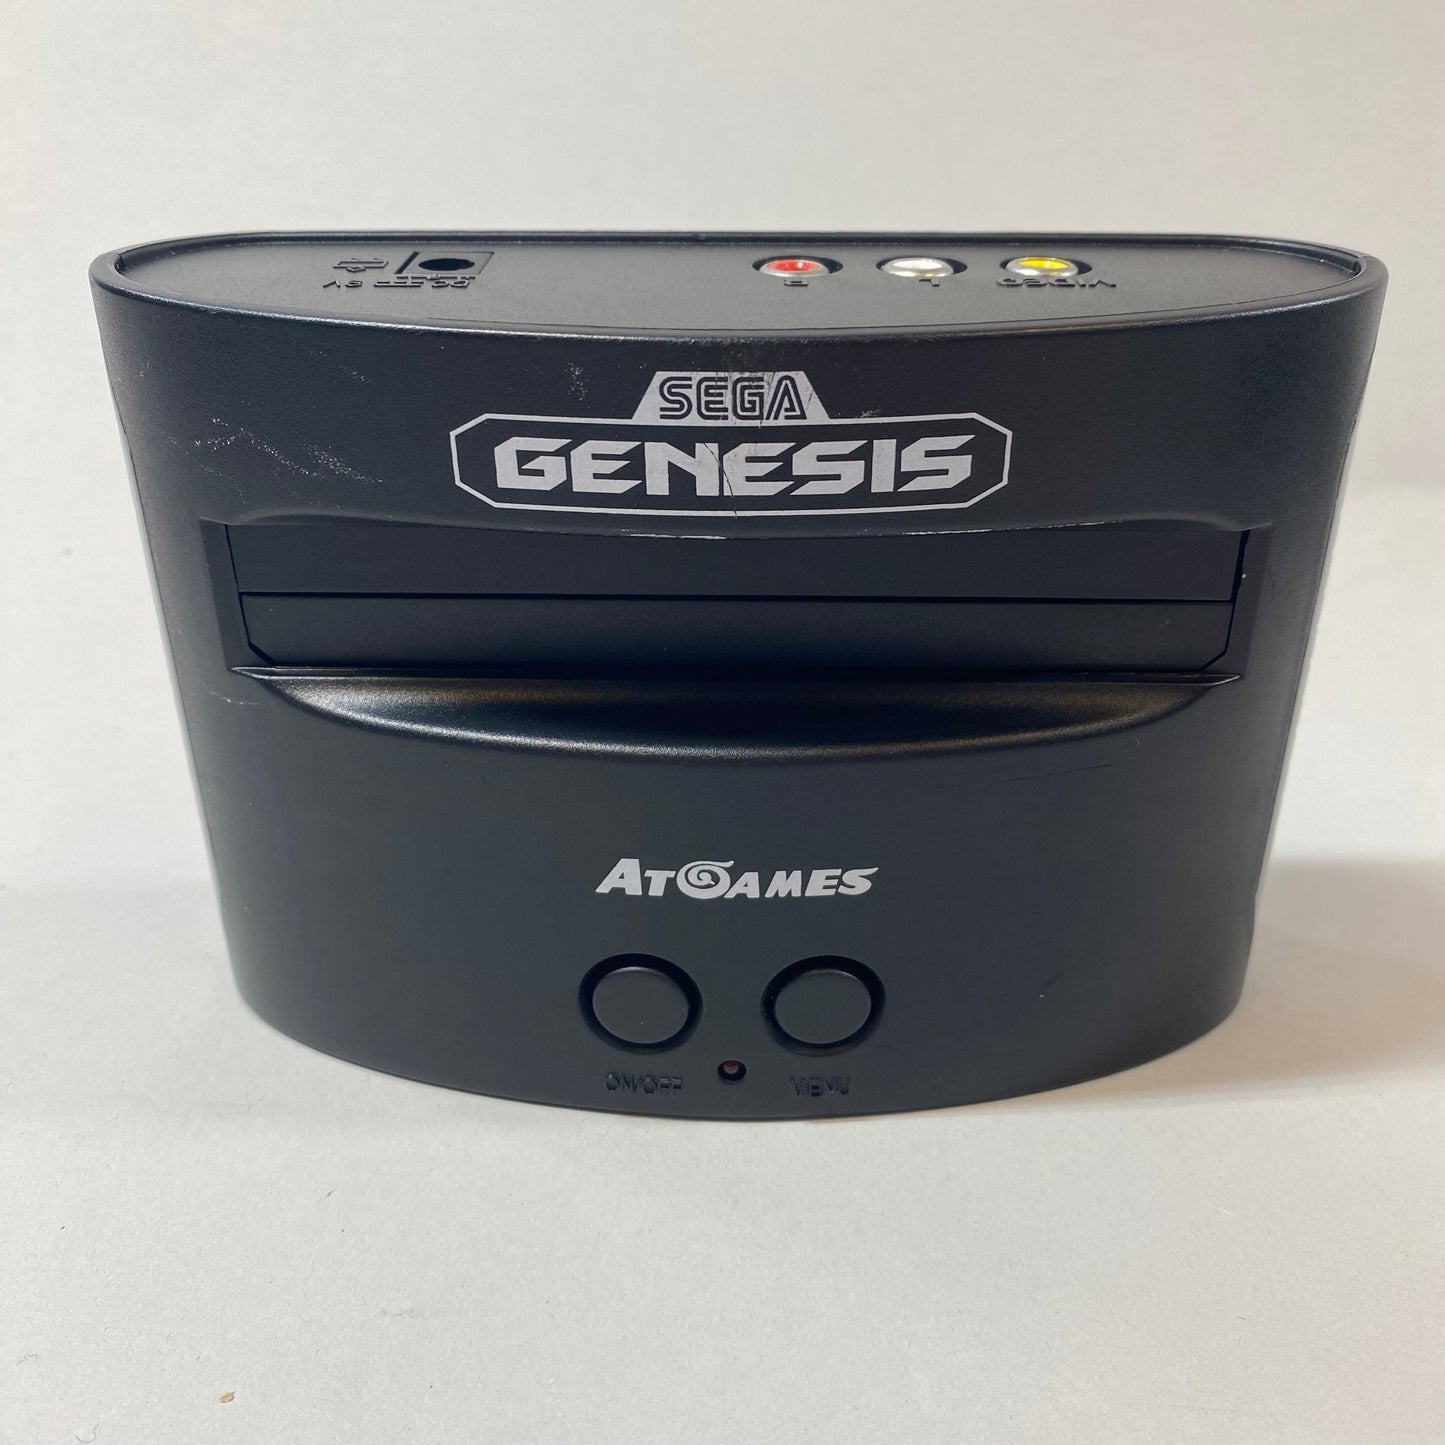 Sega Genesis AT Games Classic Mini Game Console 2 Controllers and Cords